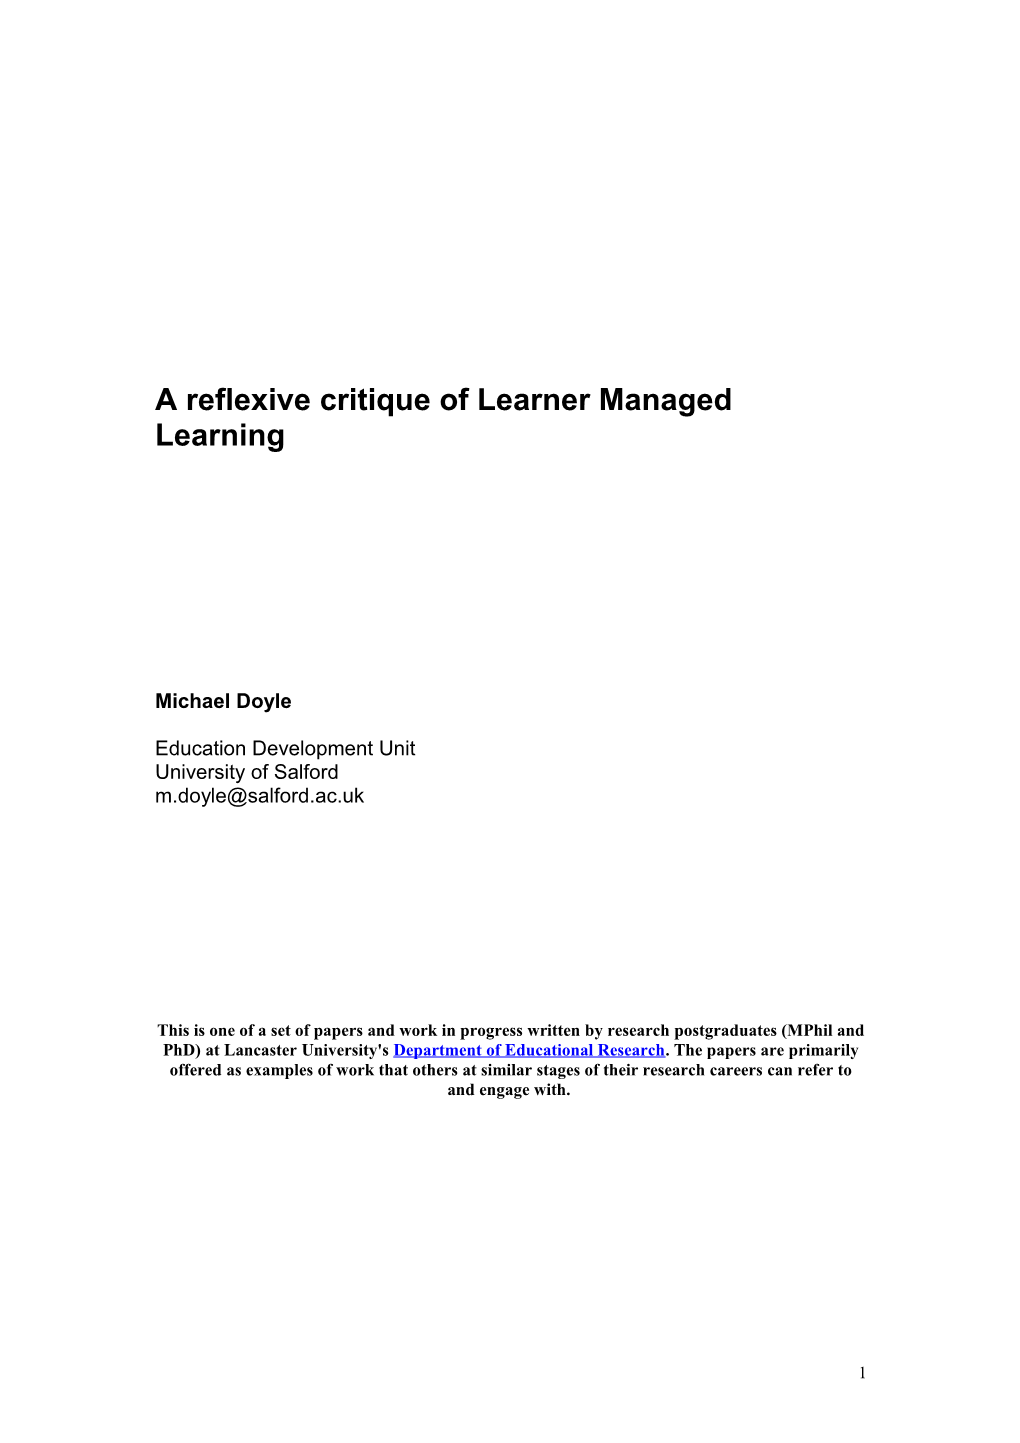 A Reflexive Critique of Learner Managed Learning